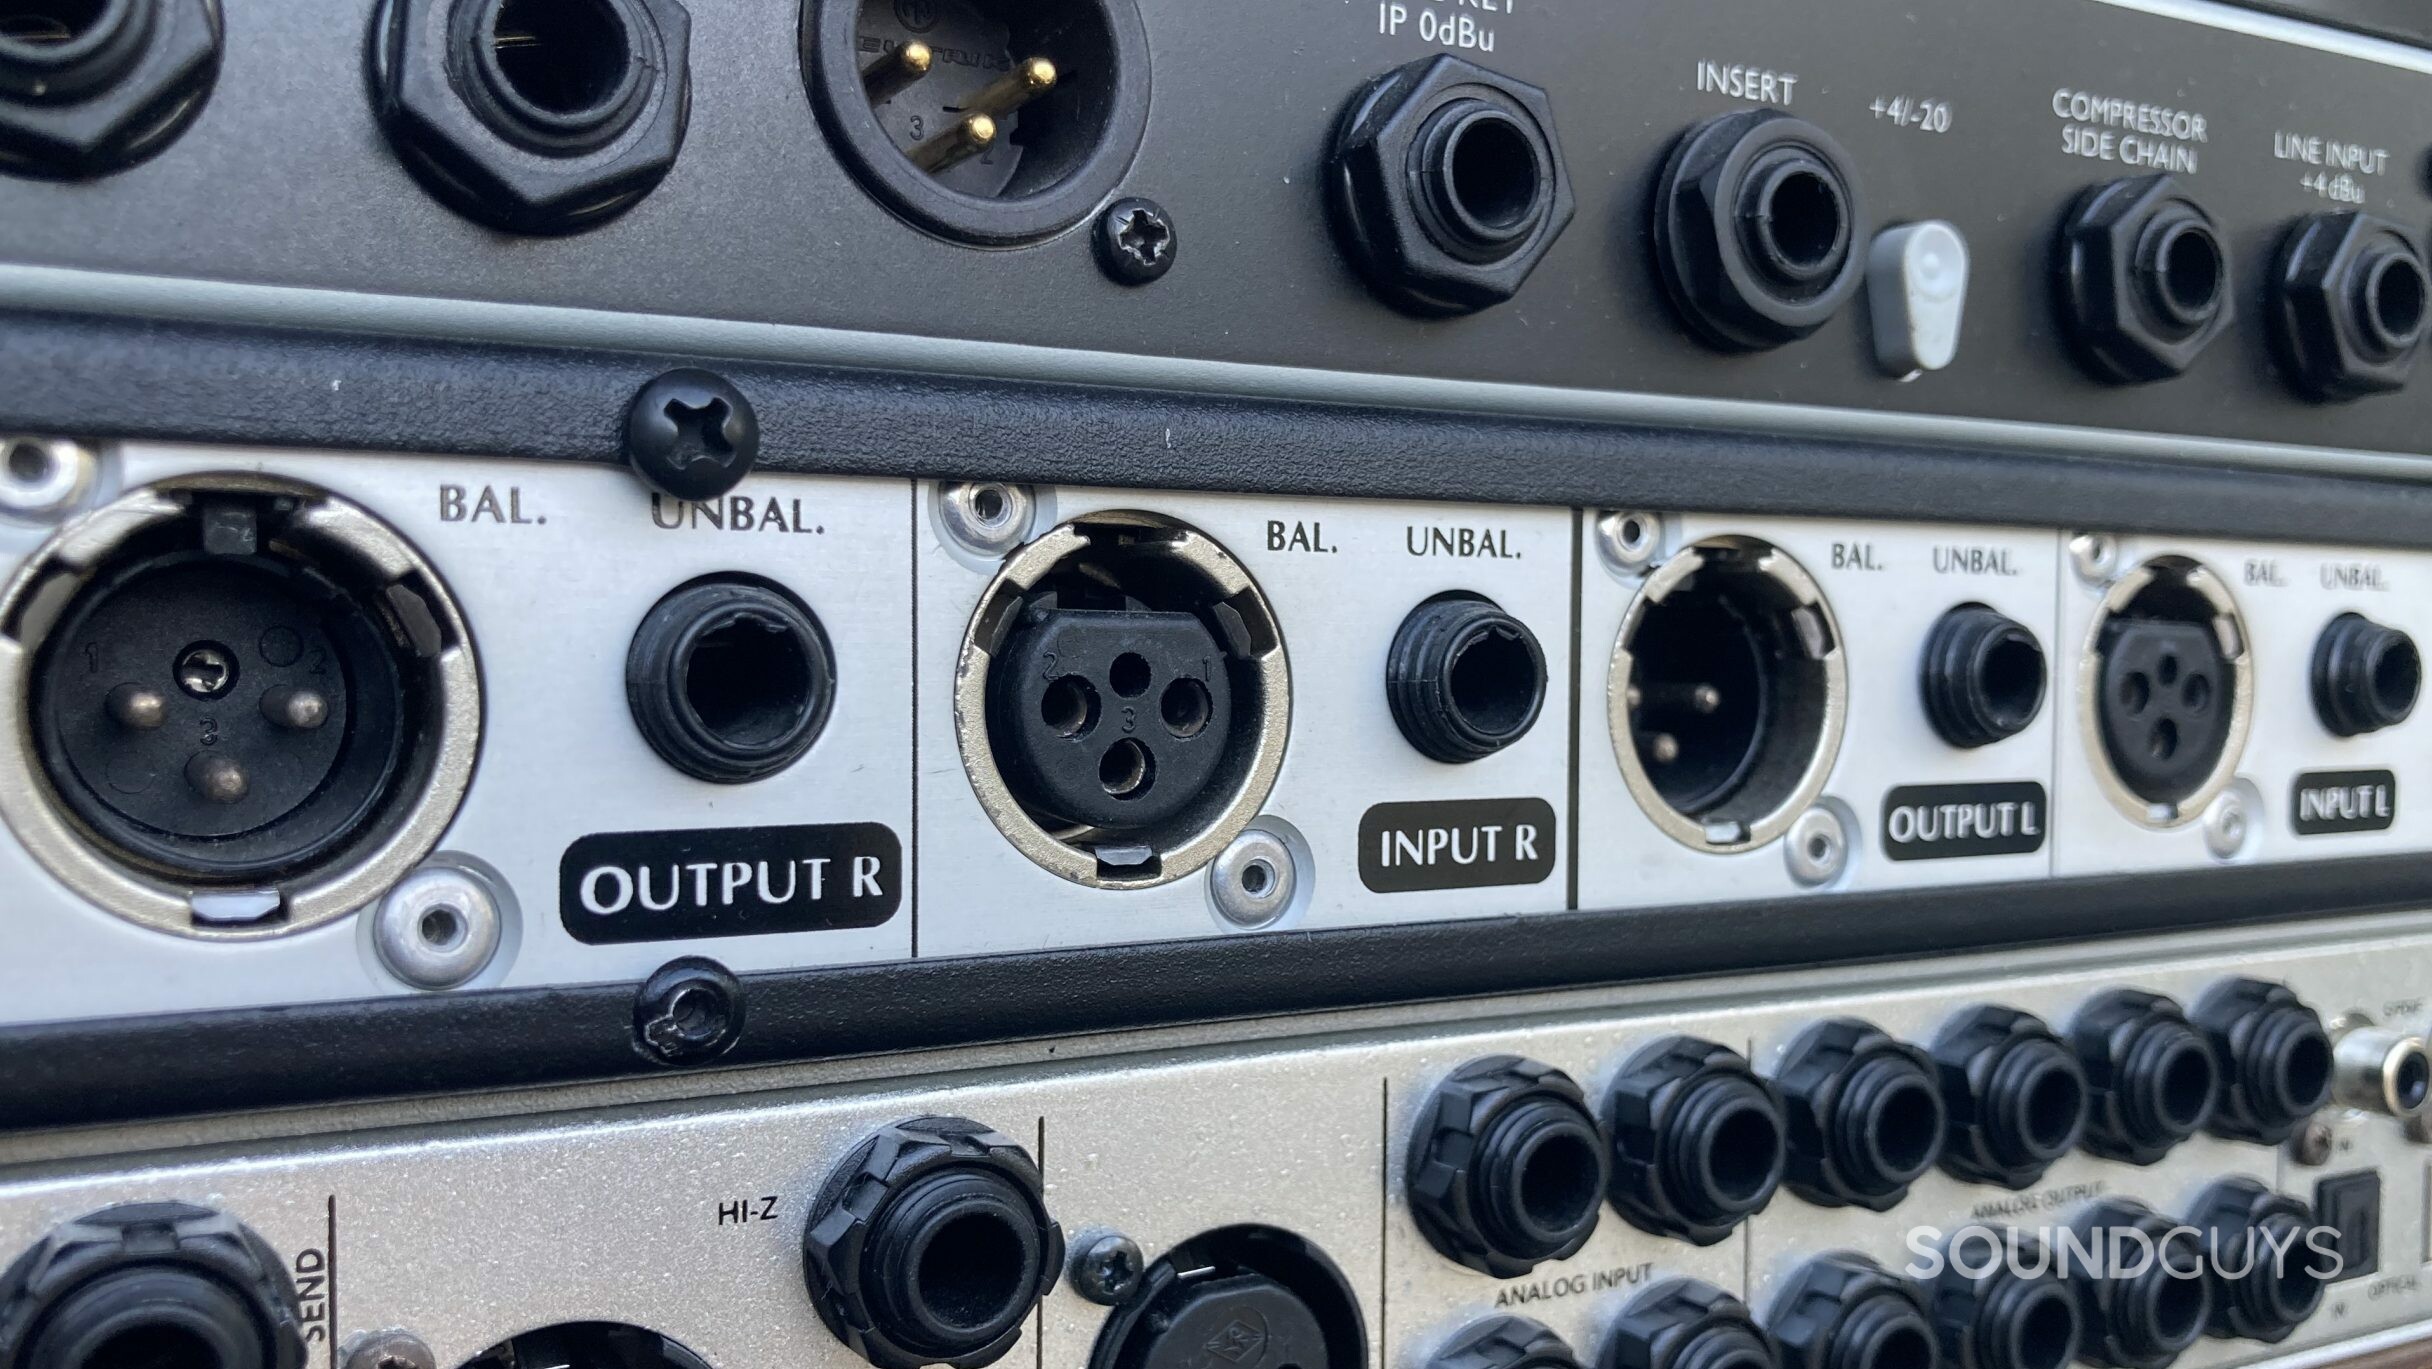 The rear panel of various pieces of studio equipment showing jacks and XLR connectors with balanced and unbalanced designations.